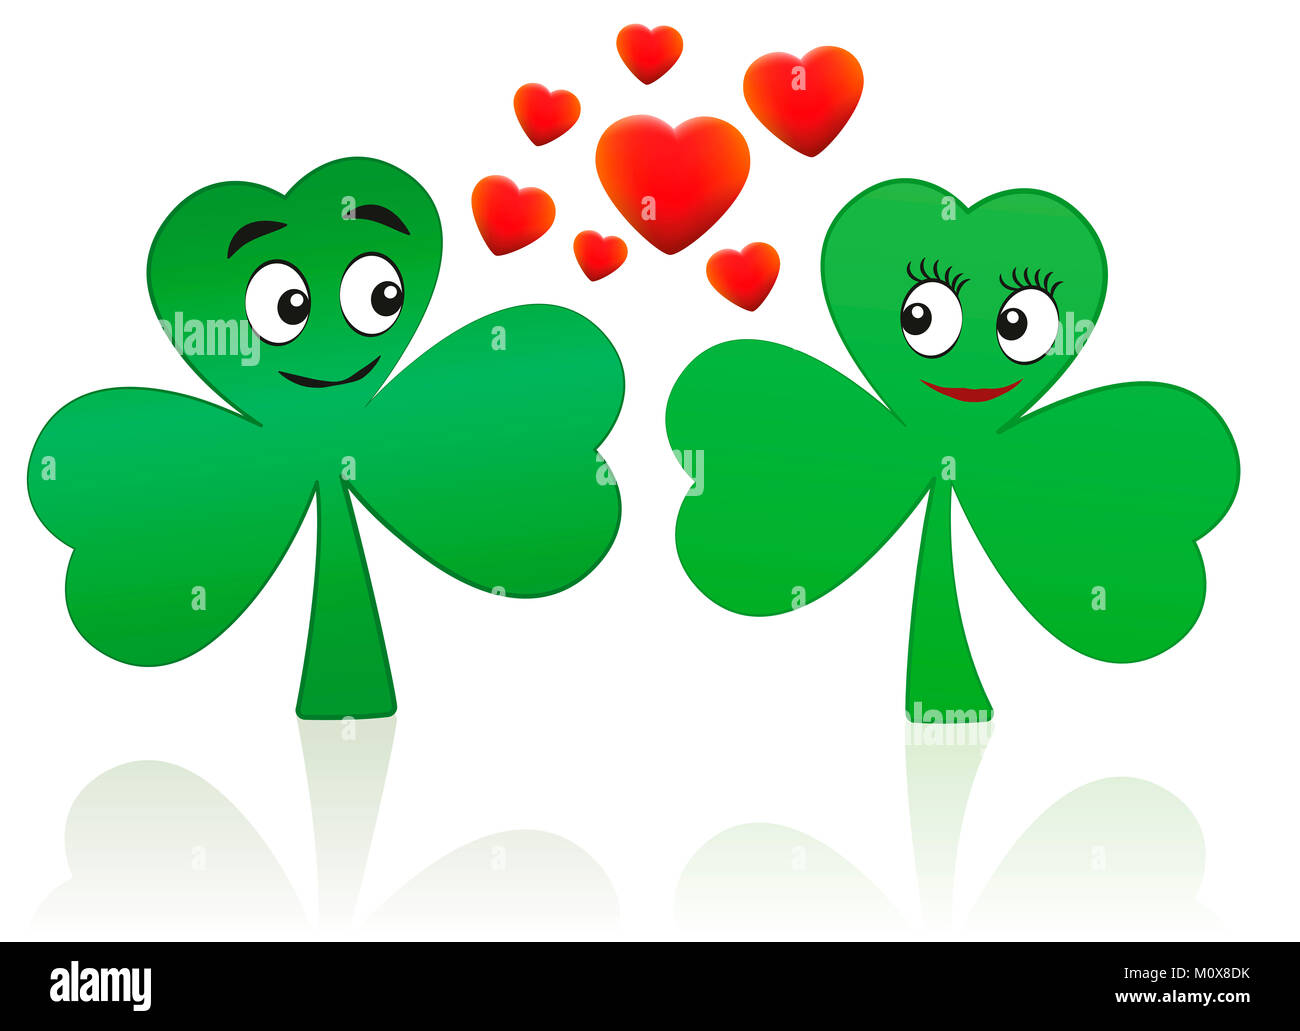 Shamrocks in love - two cute saint patricks day comic figures with romantic smiling faces. Stock Photo